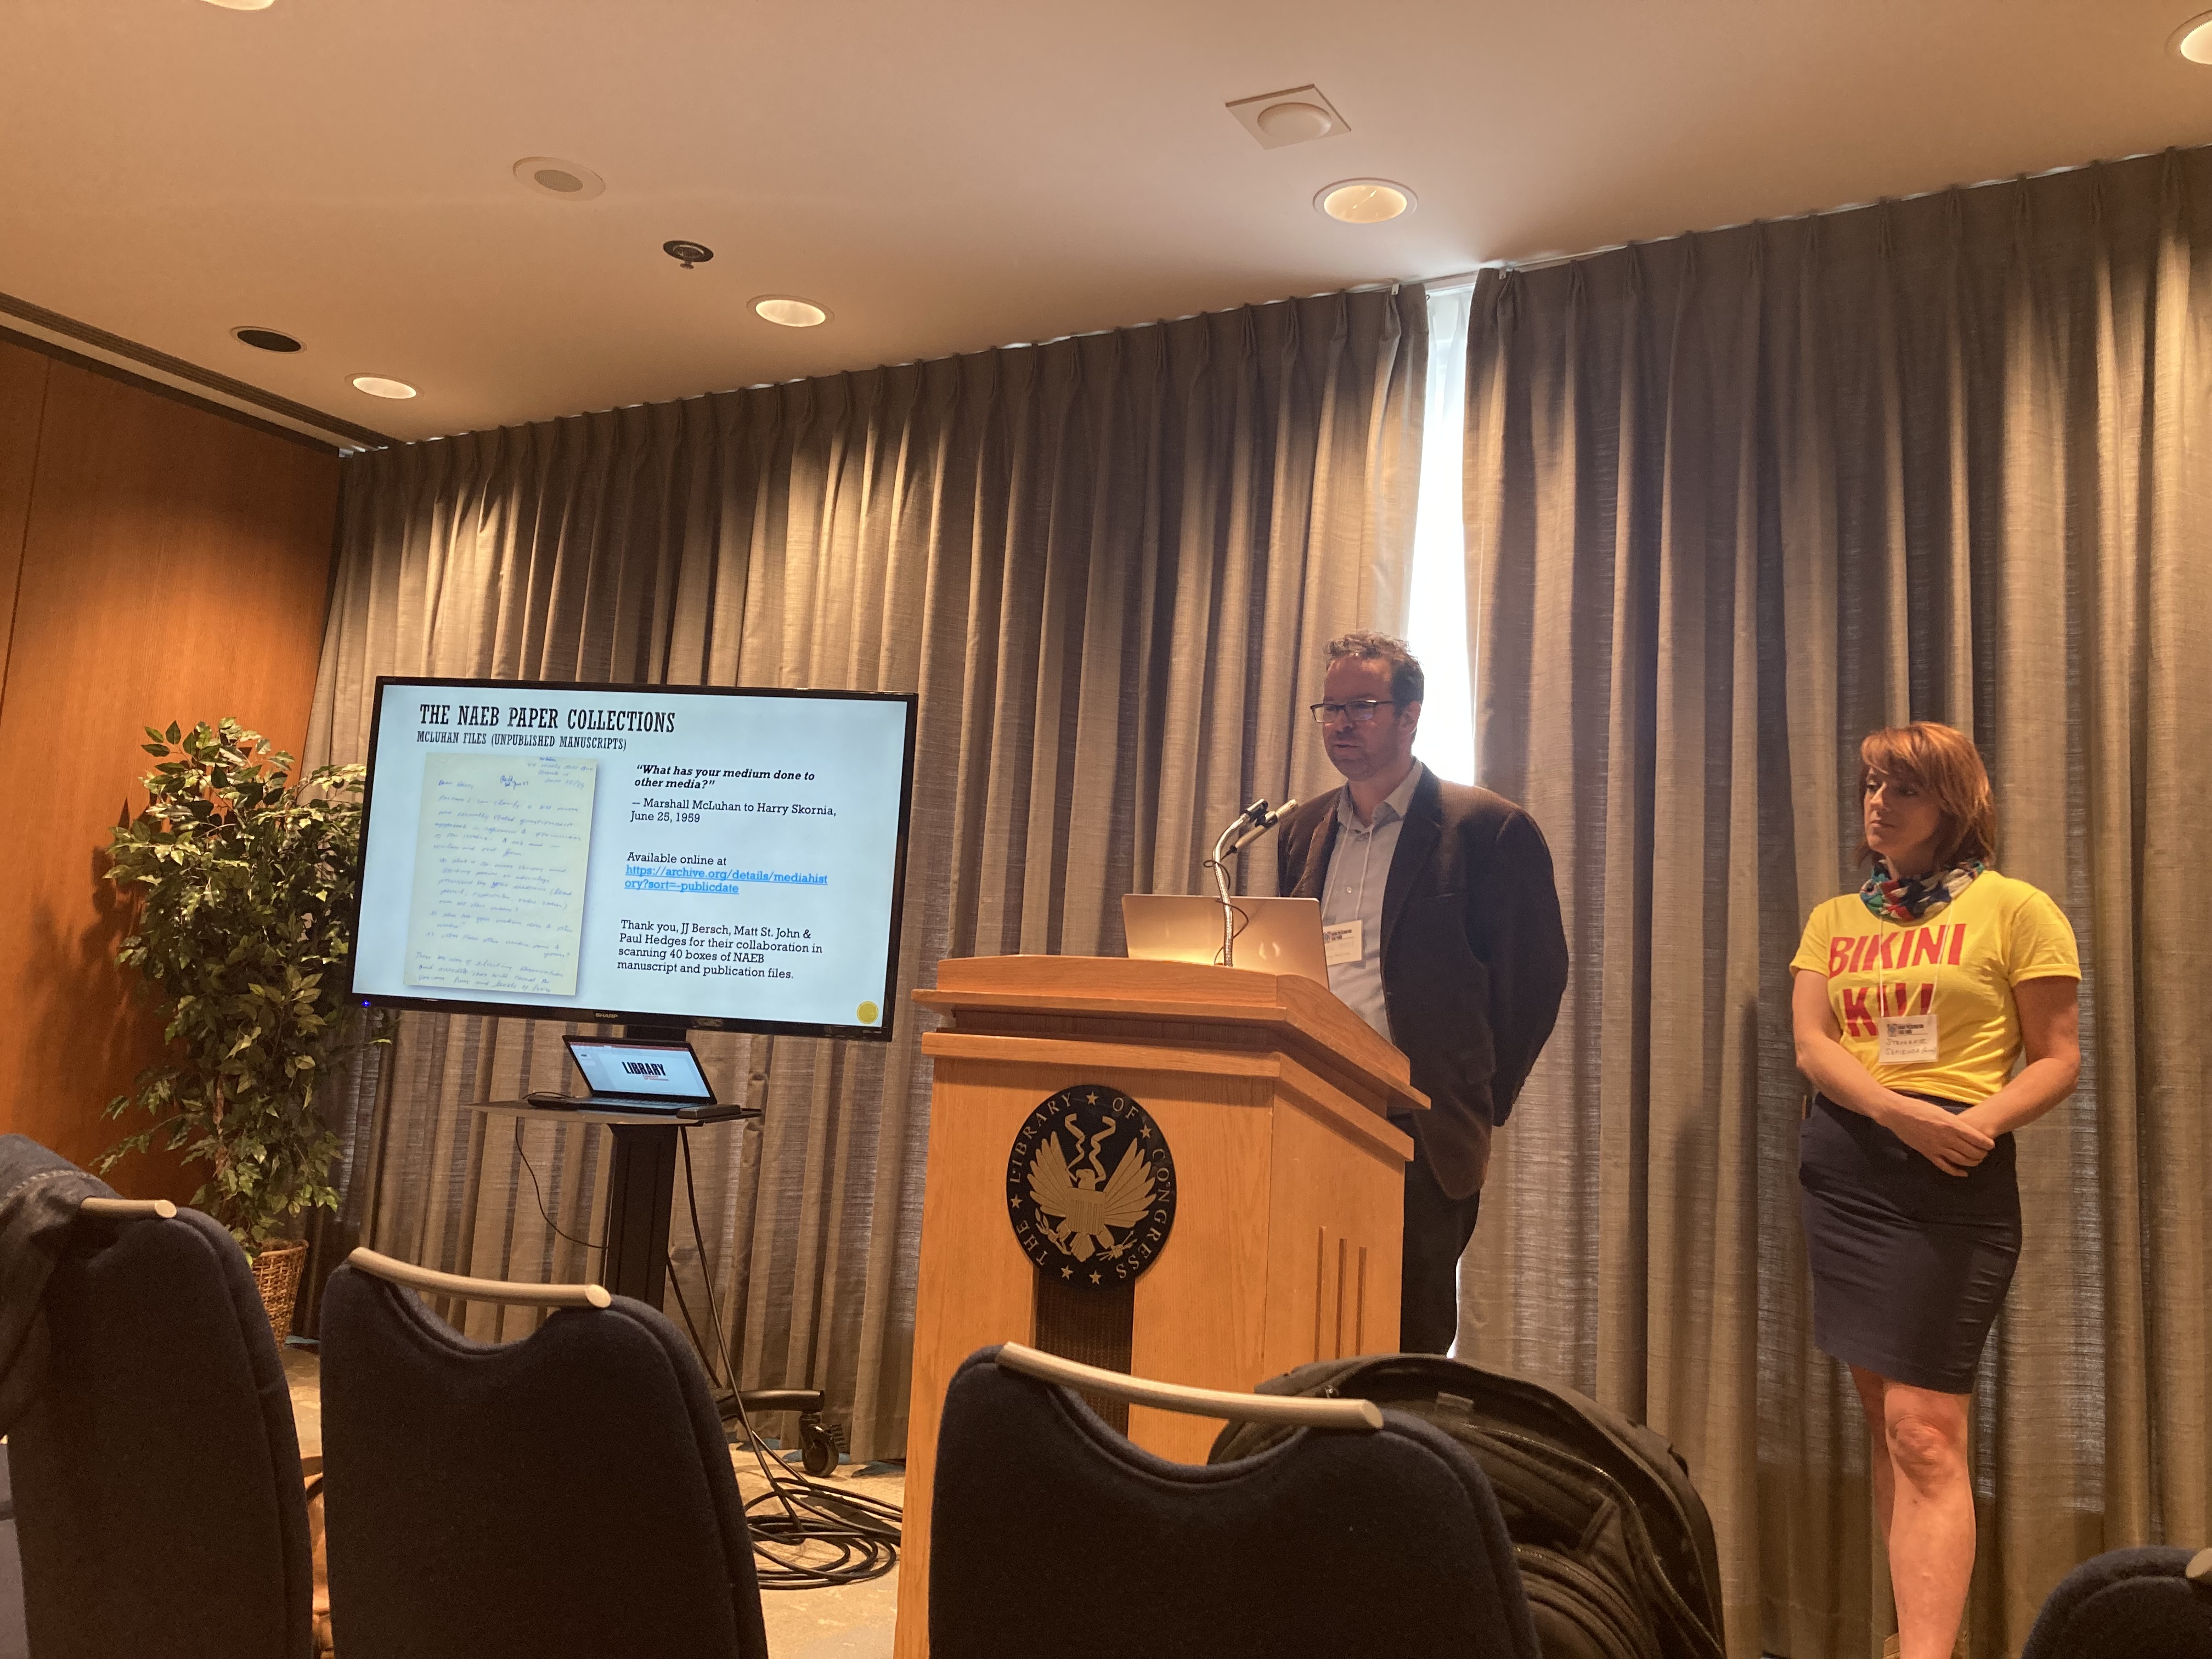 A photo of Eric Hoyt and Stephanie Sapienza presenting slides on the "NAEB Paper Collections"